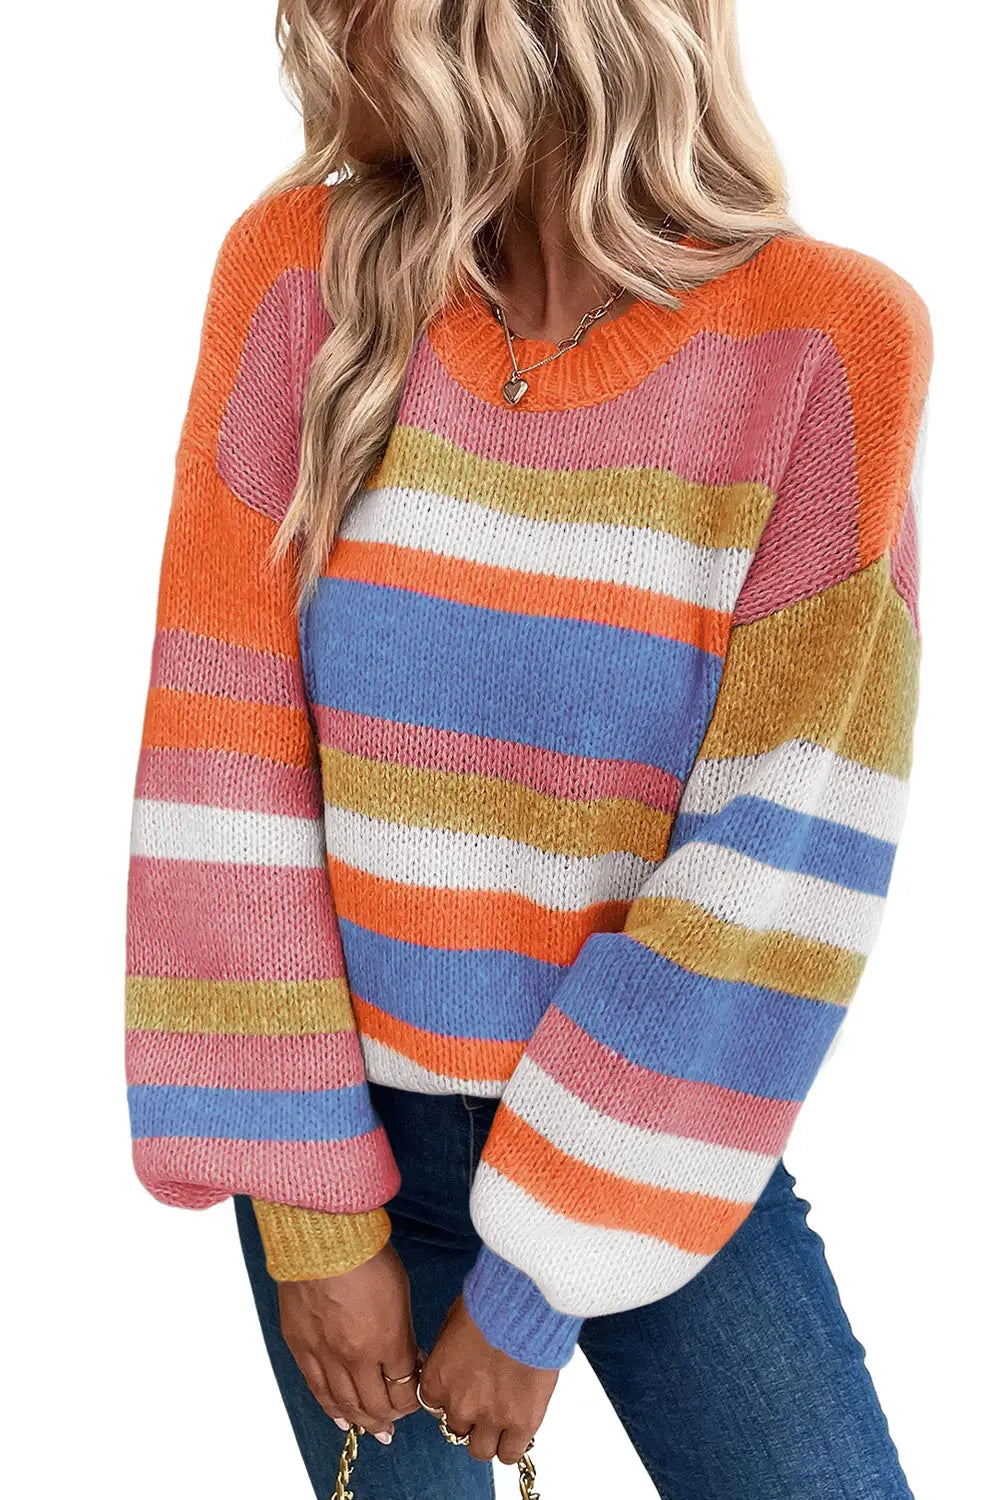 Multicolor striped knit drop shoulder puff sleeve sweater - tops